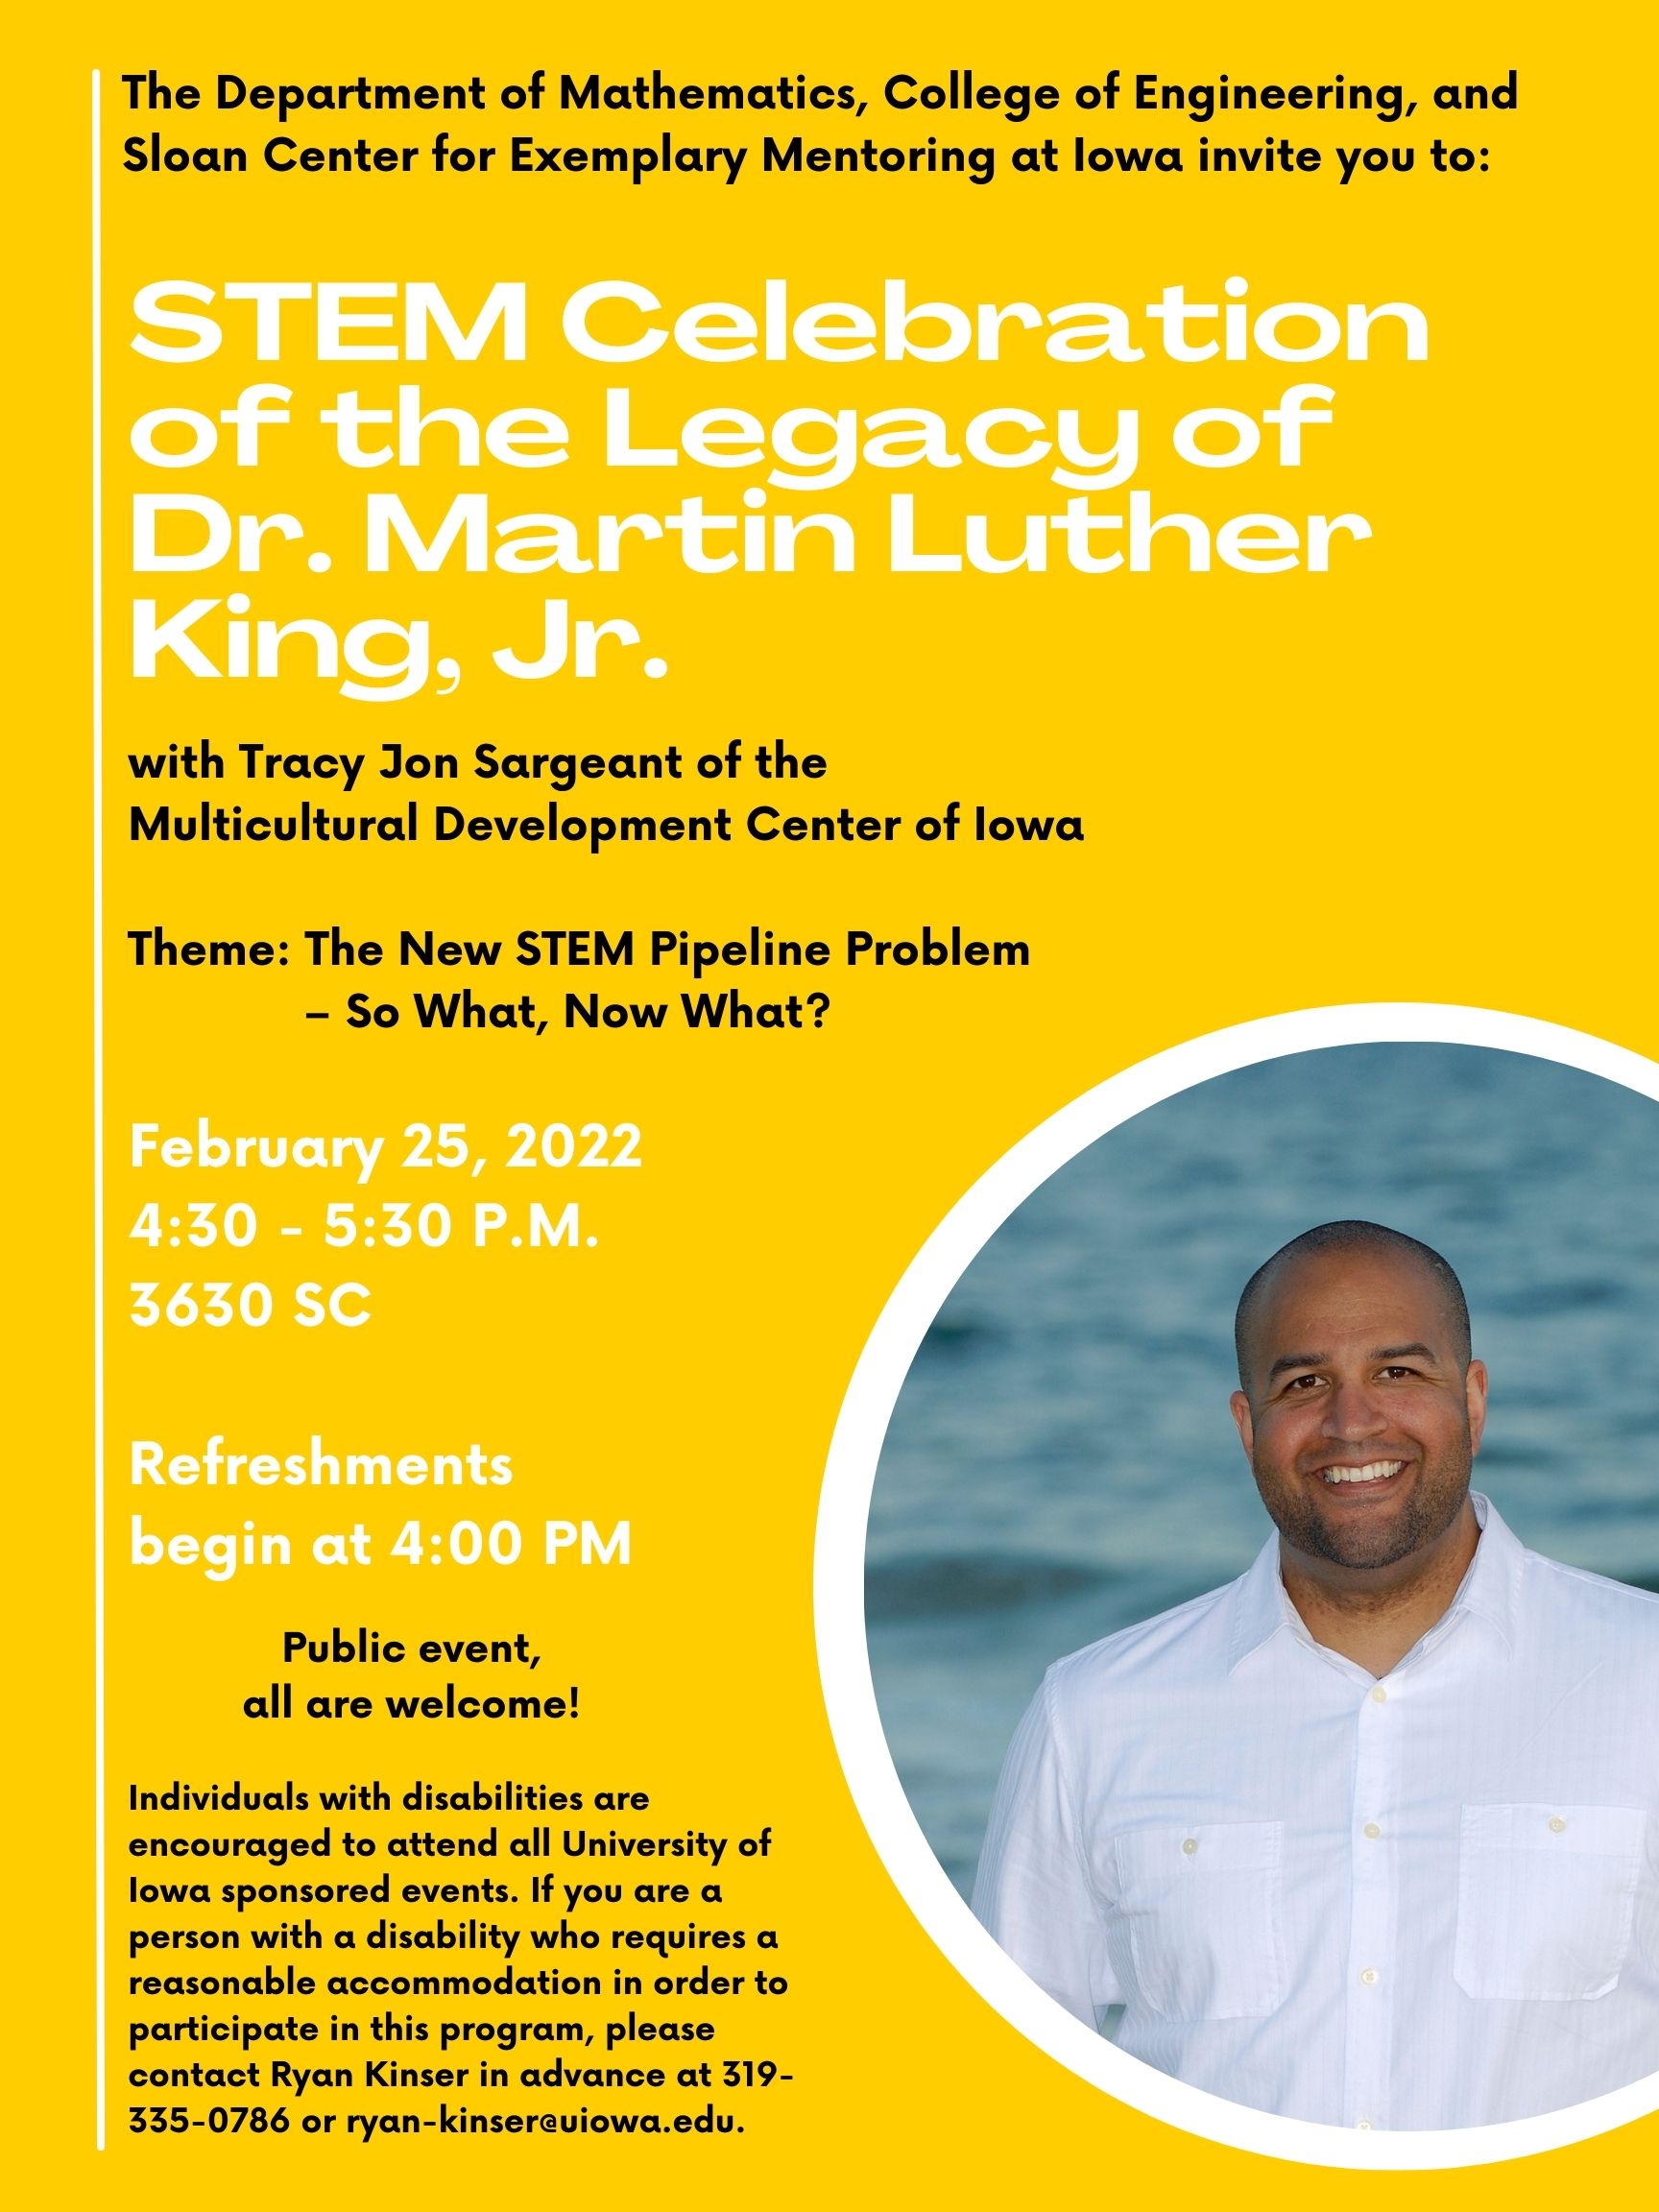 The Department of Mathematics, College of Engineering, and Sloan Center for Exemplary Mentoring at Iowa invite you to: STEM Celebration of the Legacy of Dr. Martin Luther King, Jr. with Tracy Jon Sargeant of the Multicultural Development Center of Iowa Th